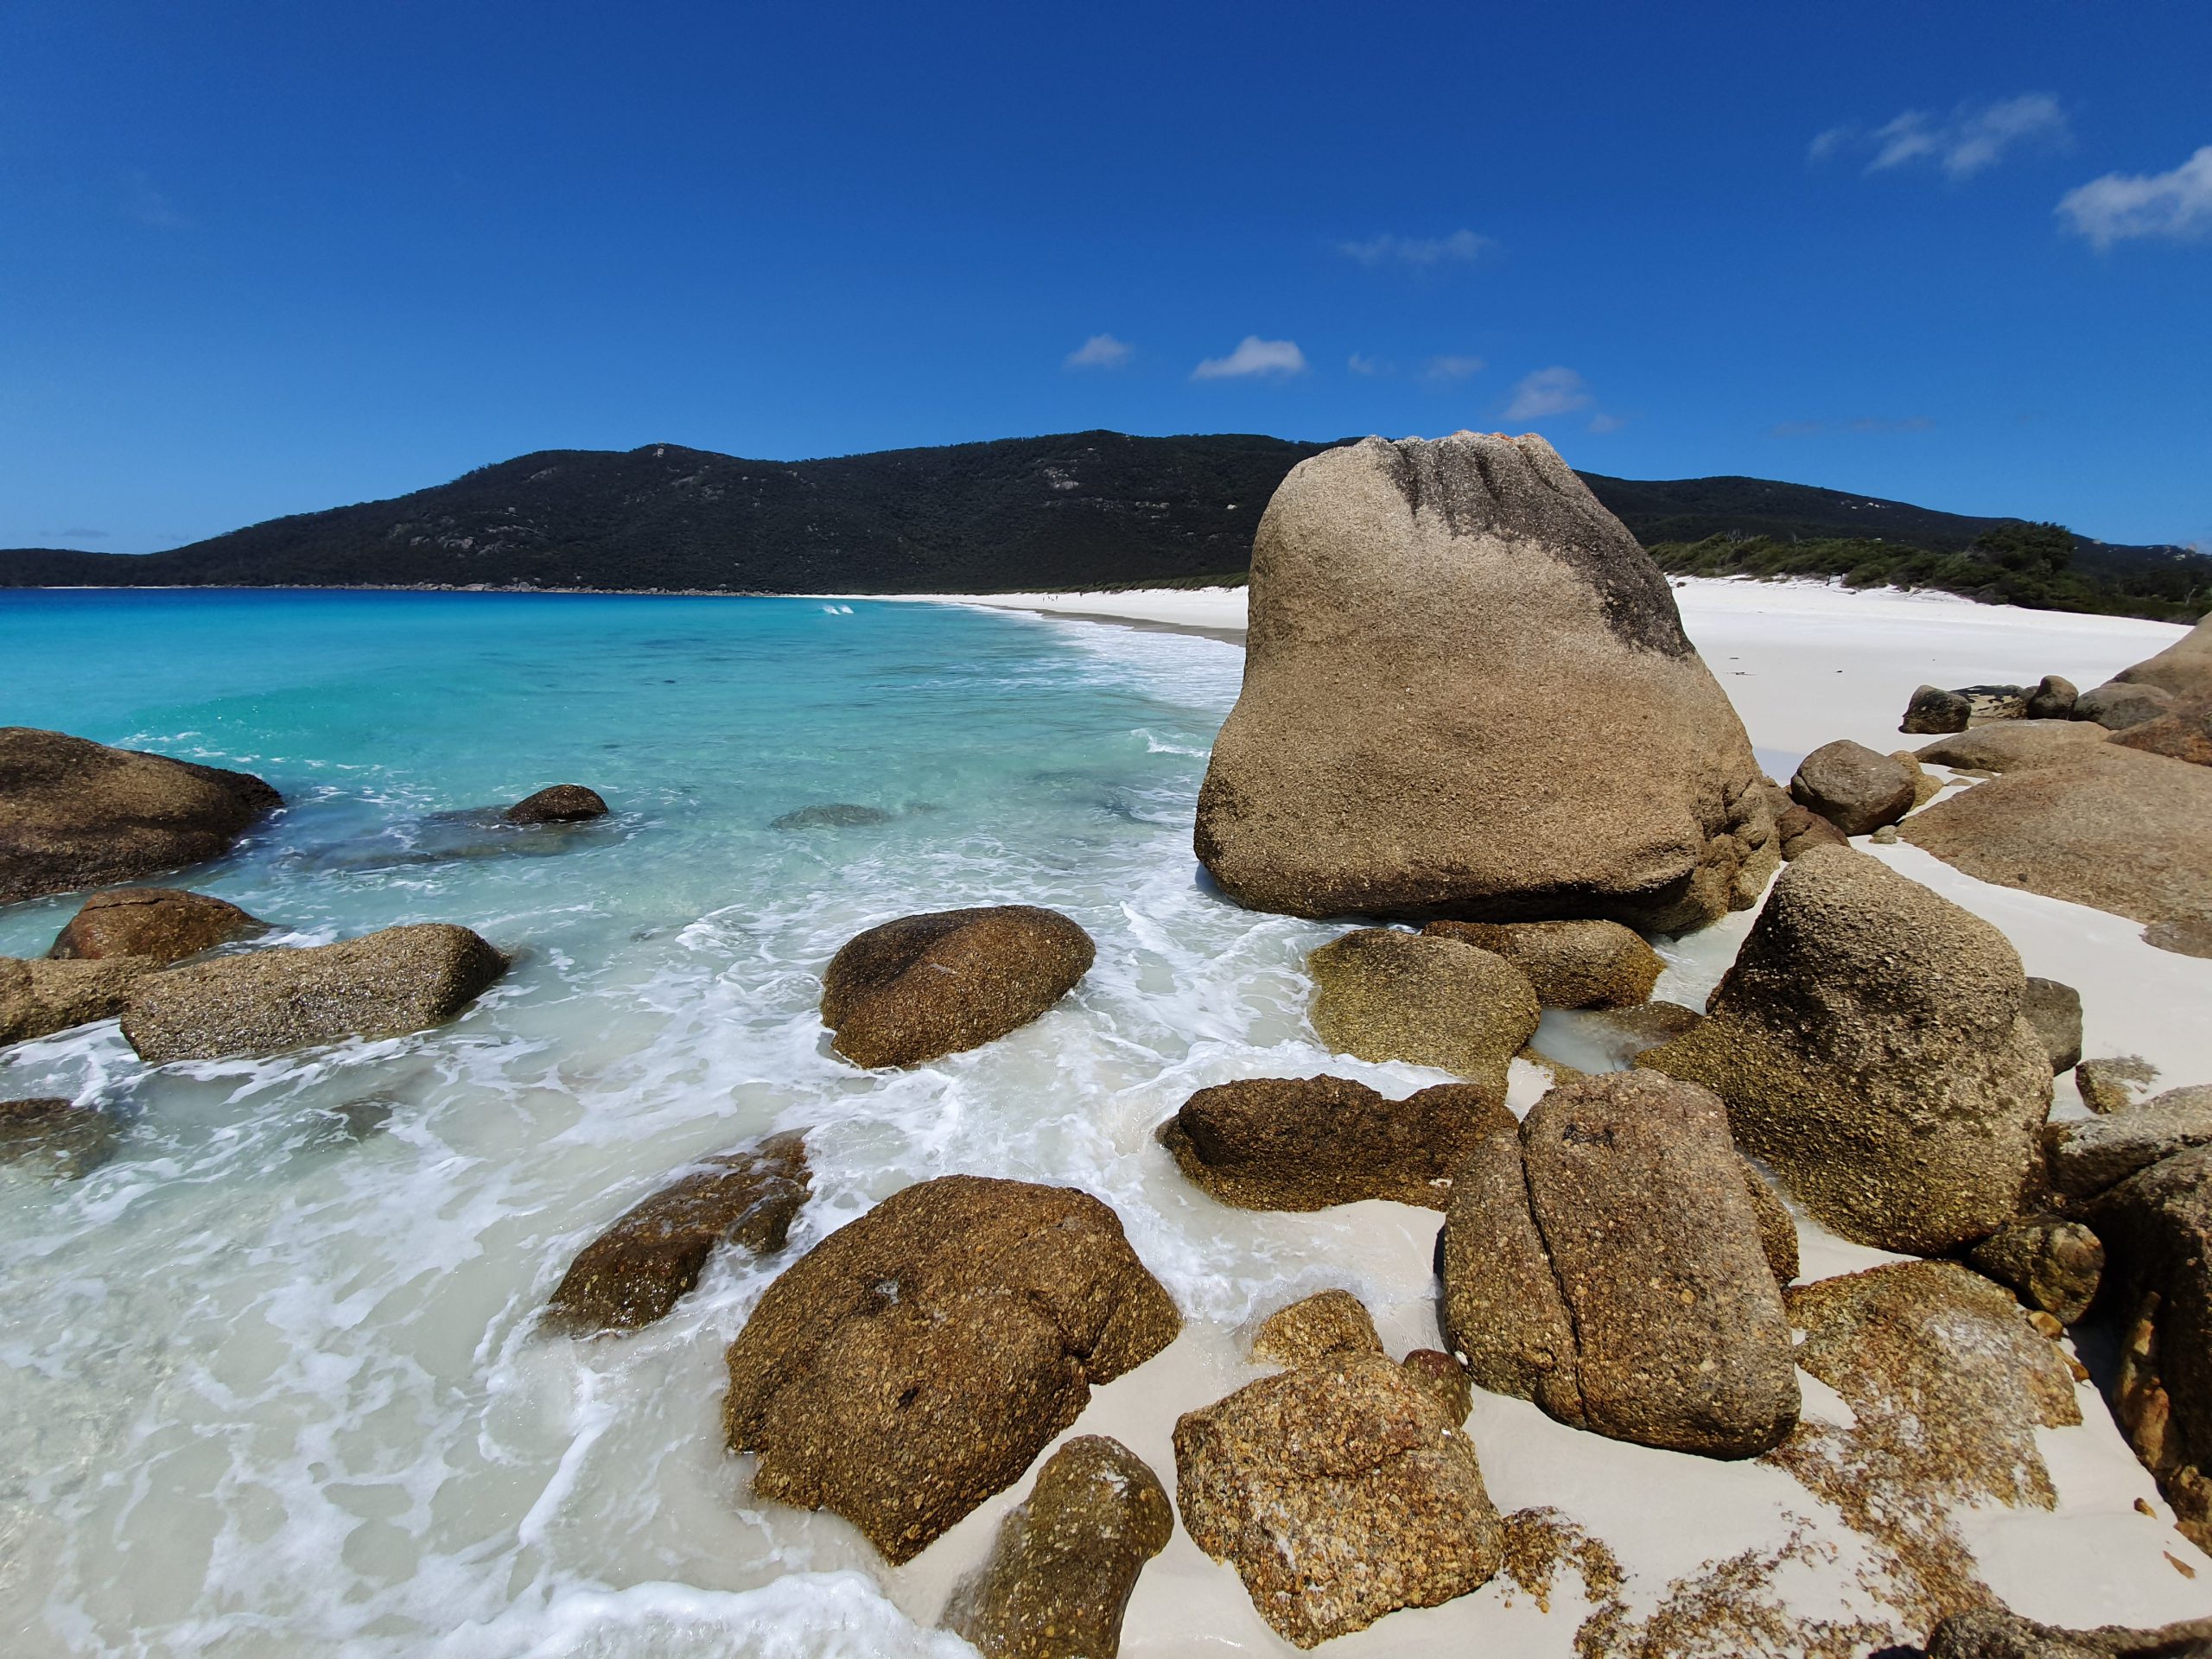 Large rocks on a white sandy beach with gentle waves from clear ocean, and grassy headland in the distance.